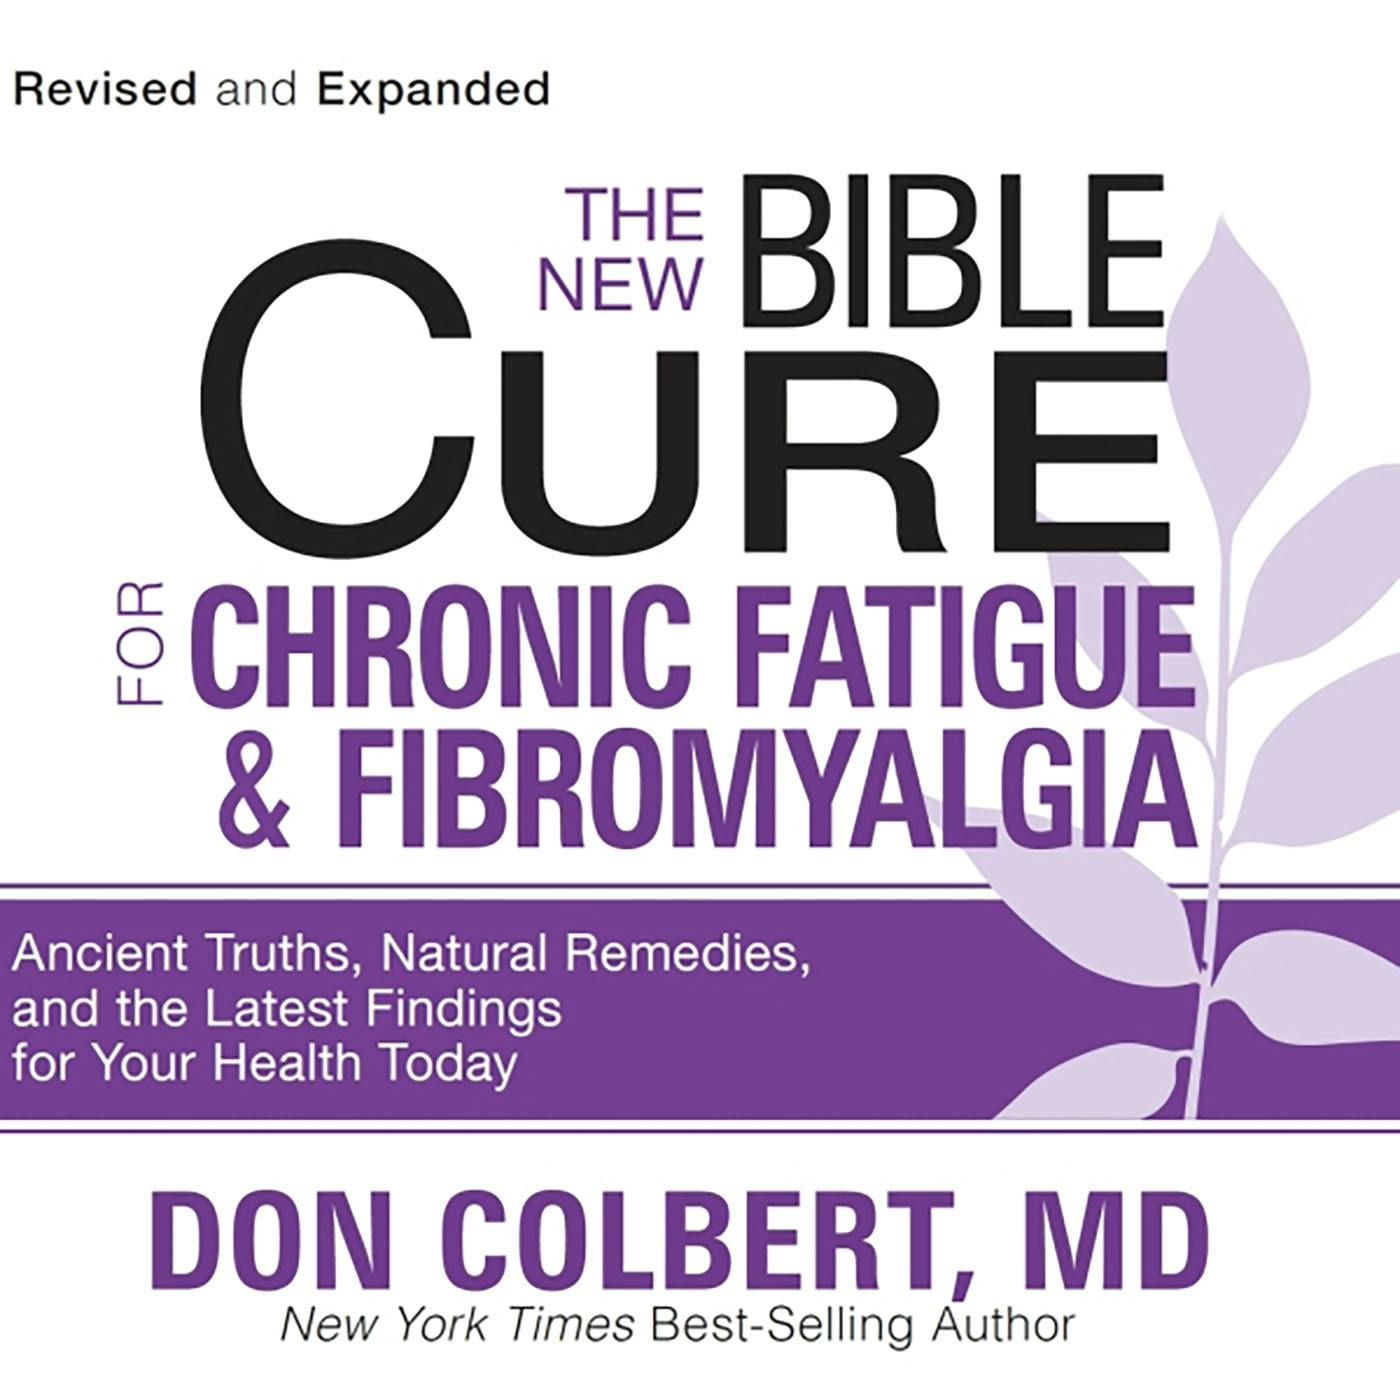 The New Bible Cure for Chronic Fatigue and Fibromyalgia: Ancient Truths, Natural Remedies, and the Latest Findings for Your Health Today - Don Colbert